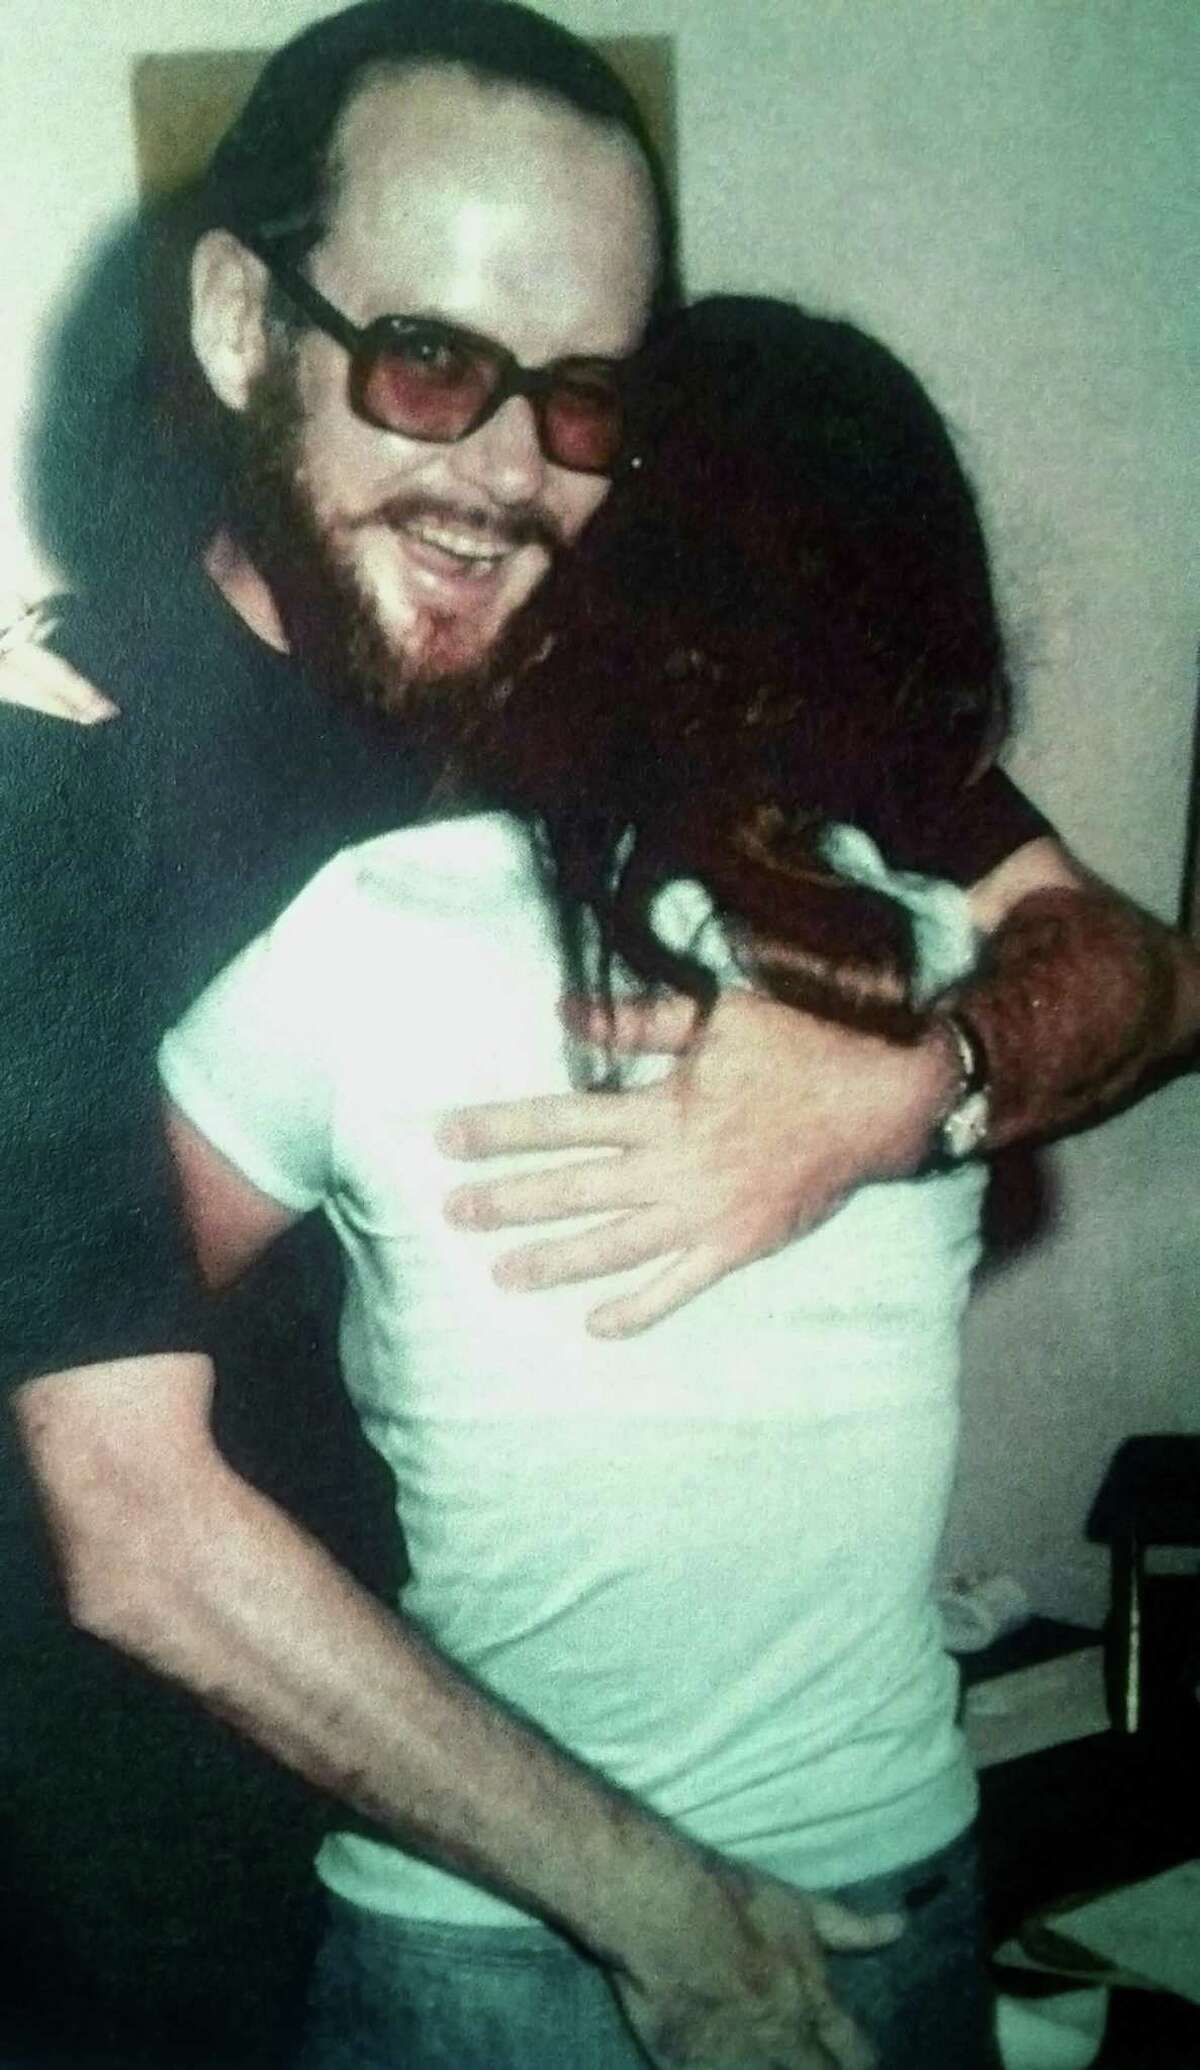 Father Charles H. Miller, identified in the Archdiocese of San Antonio's report on priests credibly accused of sexual abuse of minors, is shown in a photo taken around 1977 in St. Louis, Missouri, embracing a 14-year-old girl at a social event. She later told his Marianist order that he molested her at least twice in San Antonio when she was 17 and he was a theology professor at St. Mary's University. The woman, now a registered nurse in St. Louis, has asked that the Express-News not identify her.